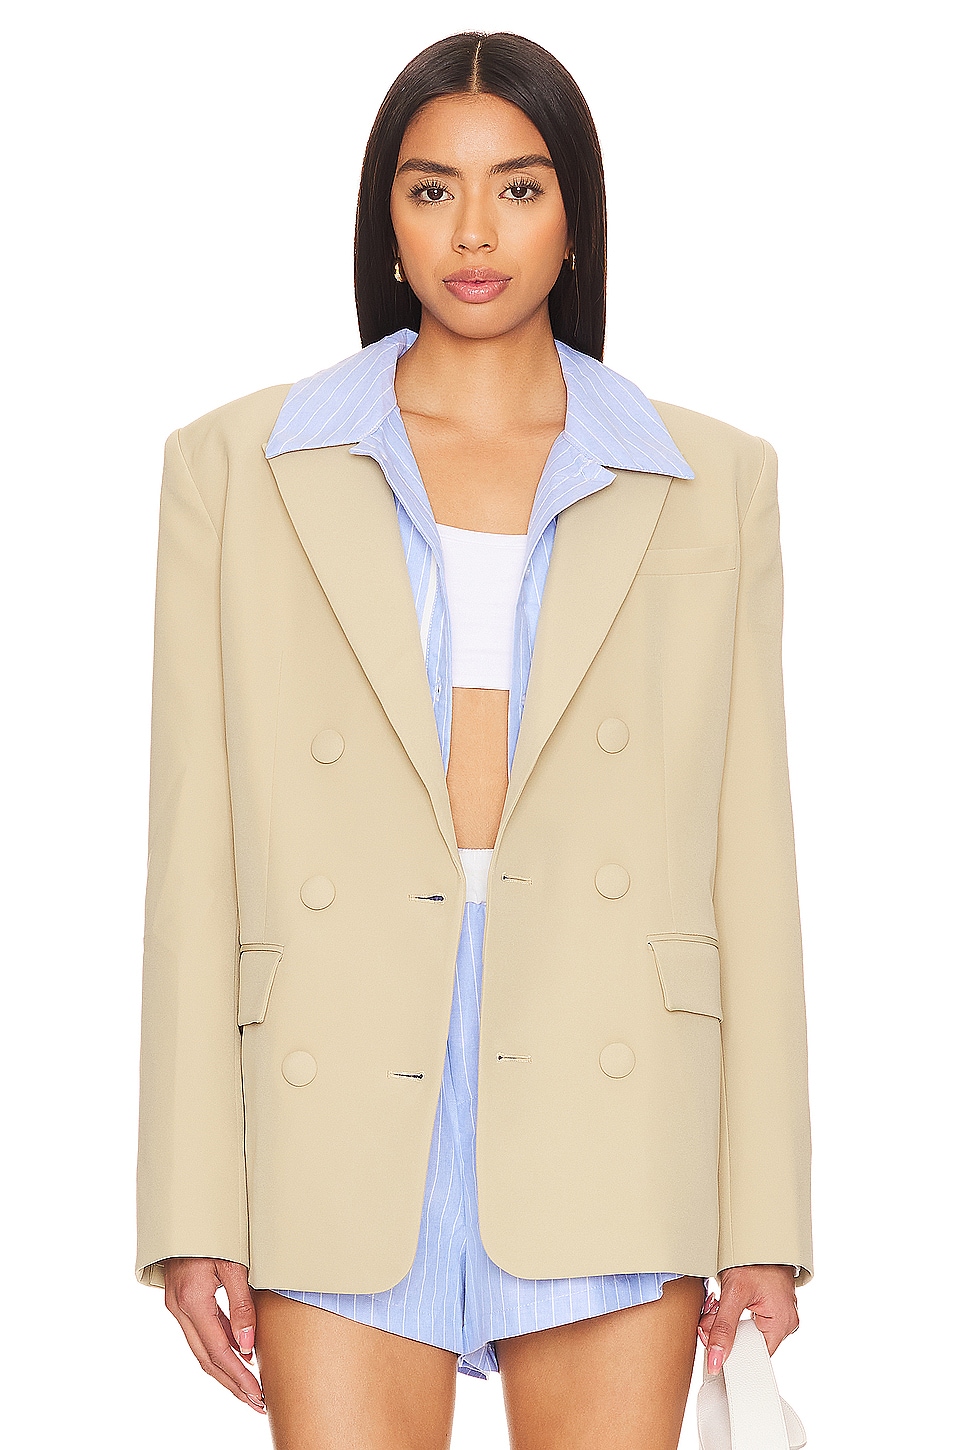 Lovers and Friends Lyra Blazer in Sage Green | REVOLVE